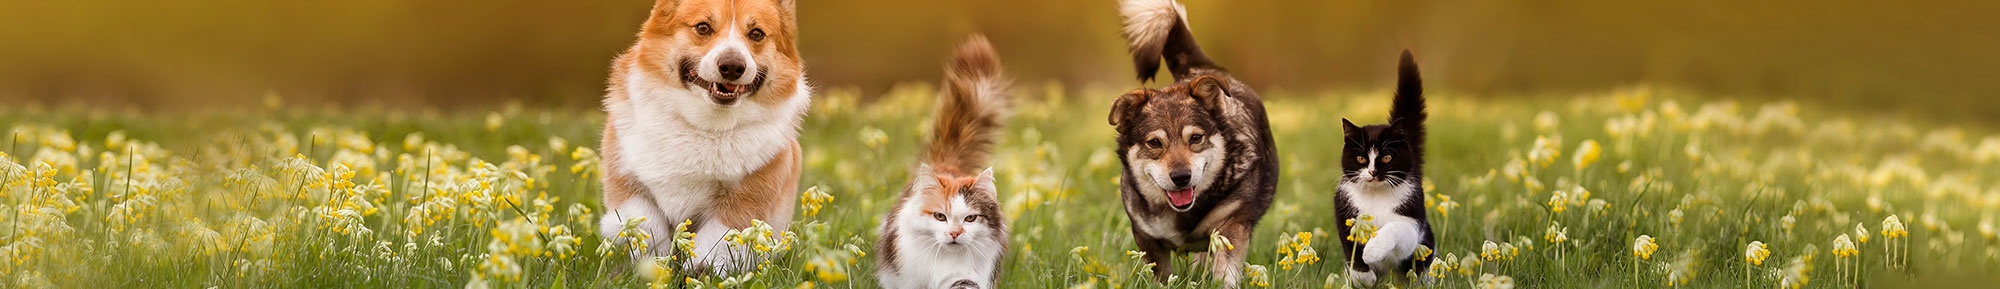 Dogs and Cats Running through Meadow